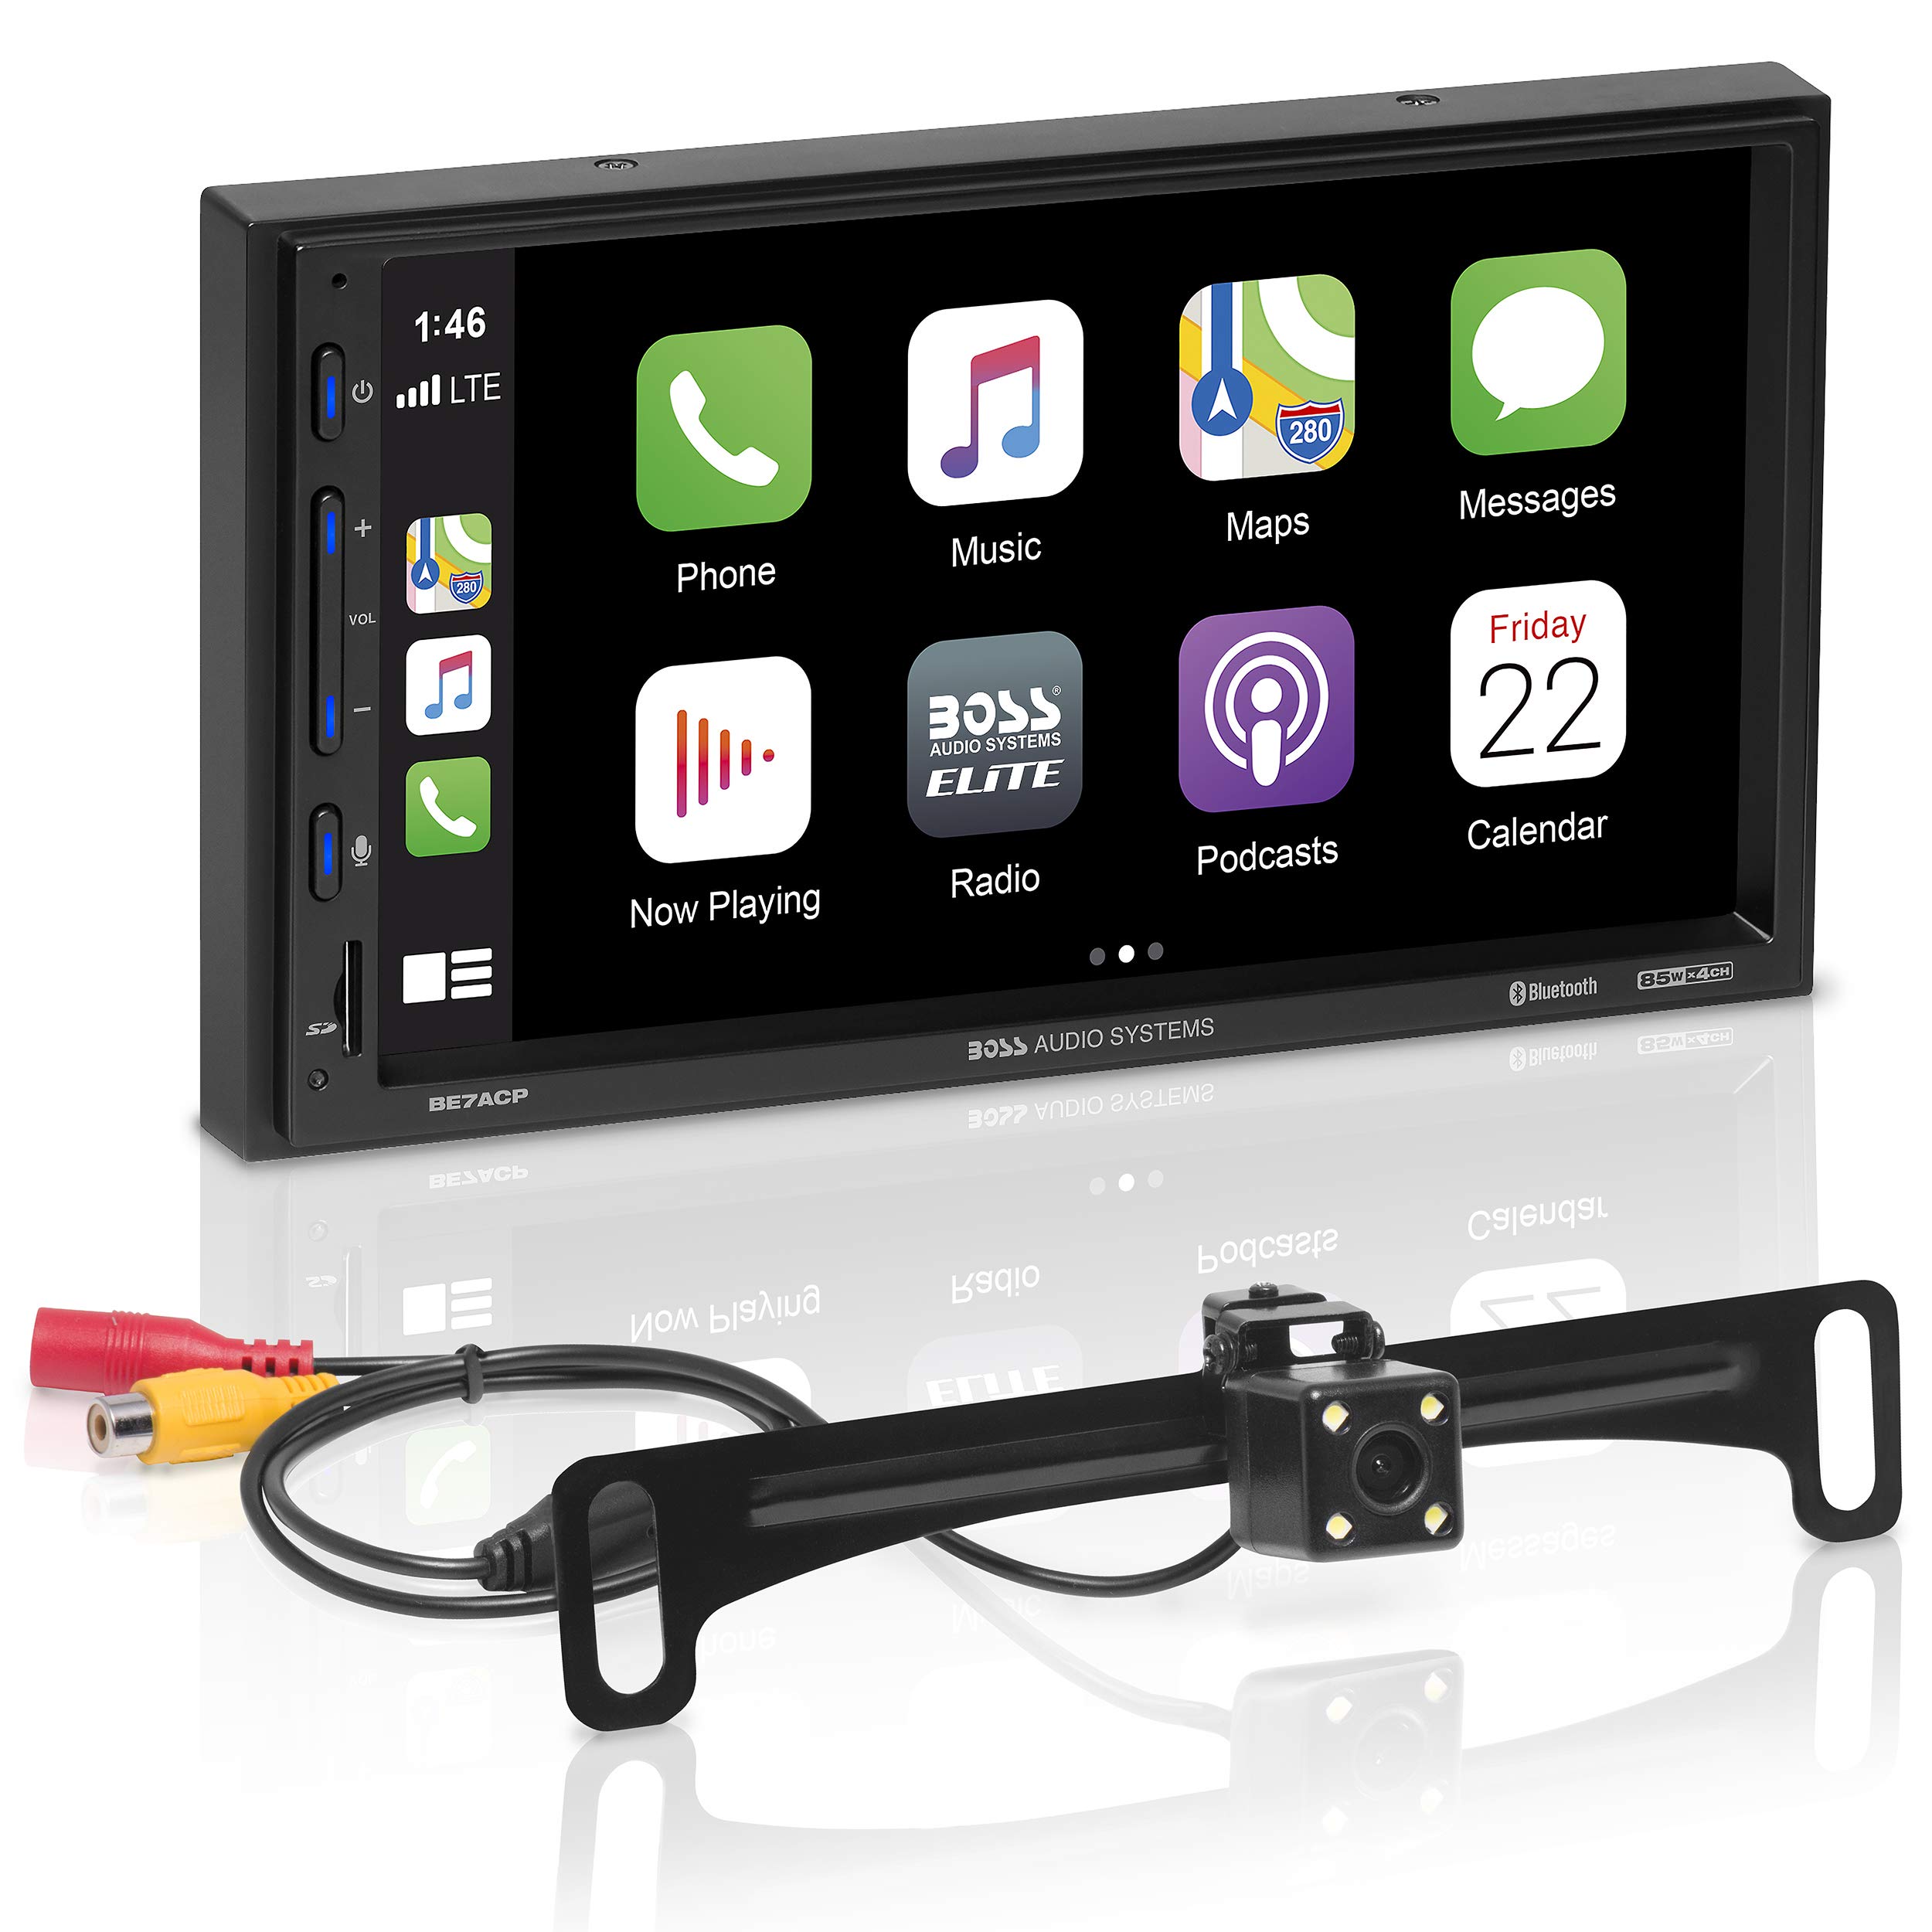 BOSS Audio Systems Systems Elite 汽车多媒体播放器，带 Apple CarPlay Android Auto